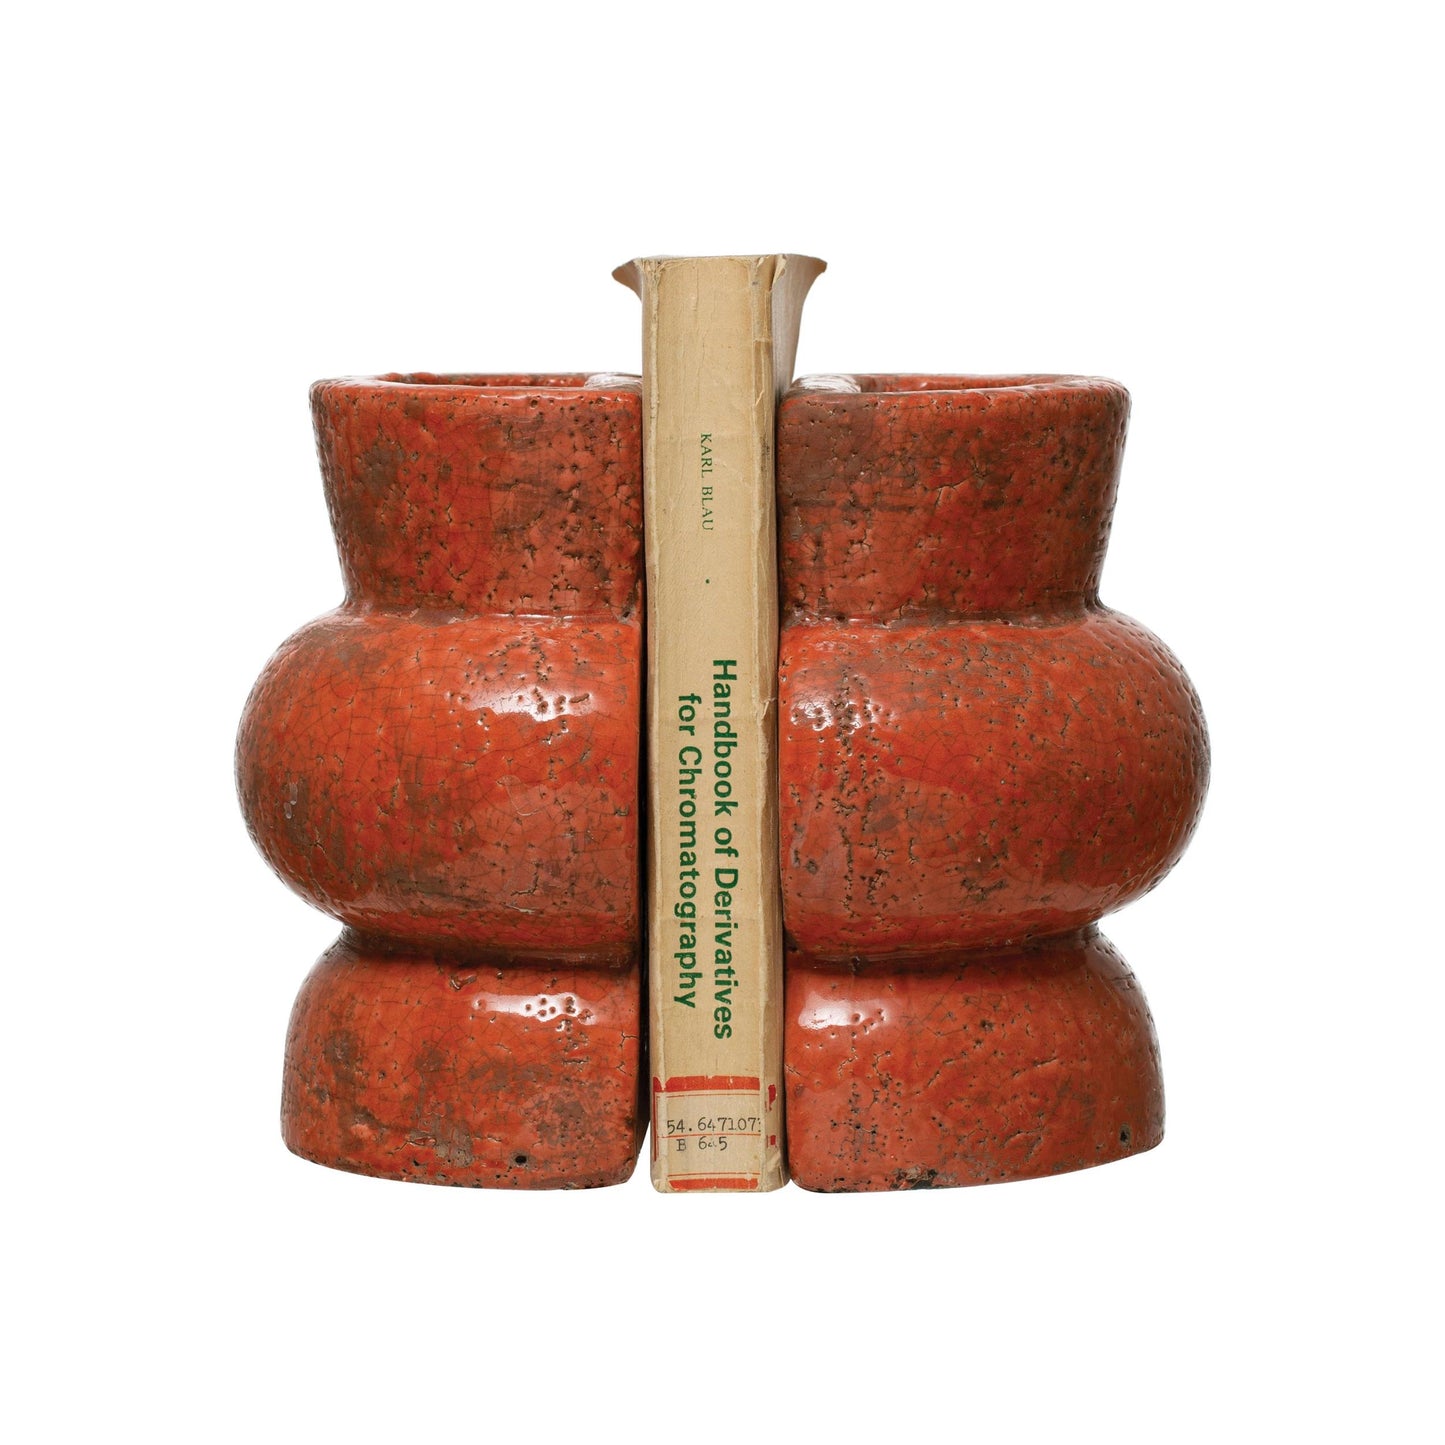 Picture of Terracotta Vase Bookends Coral